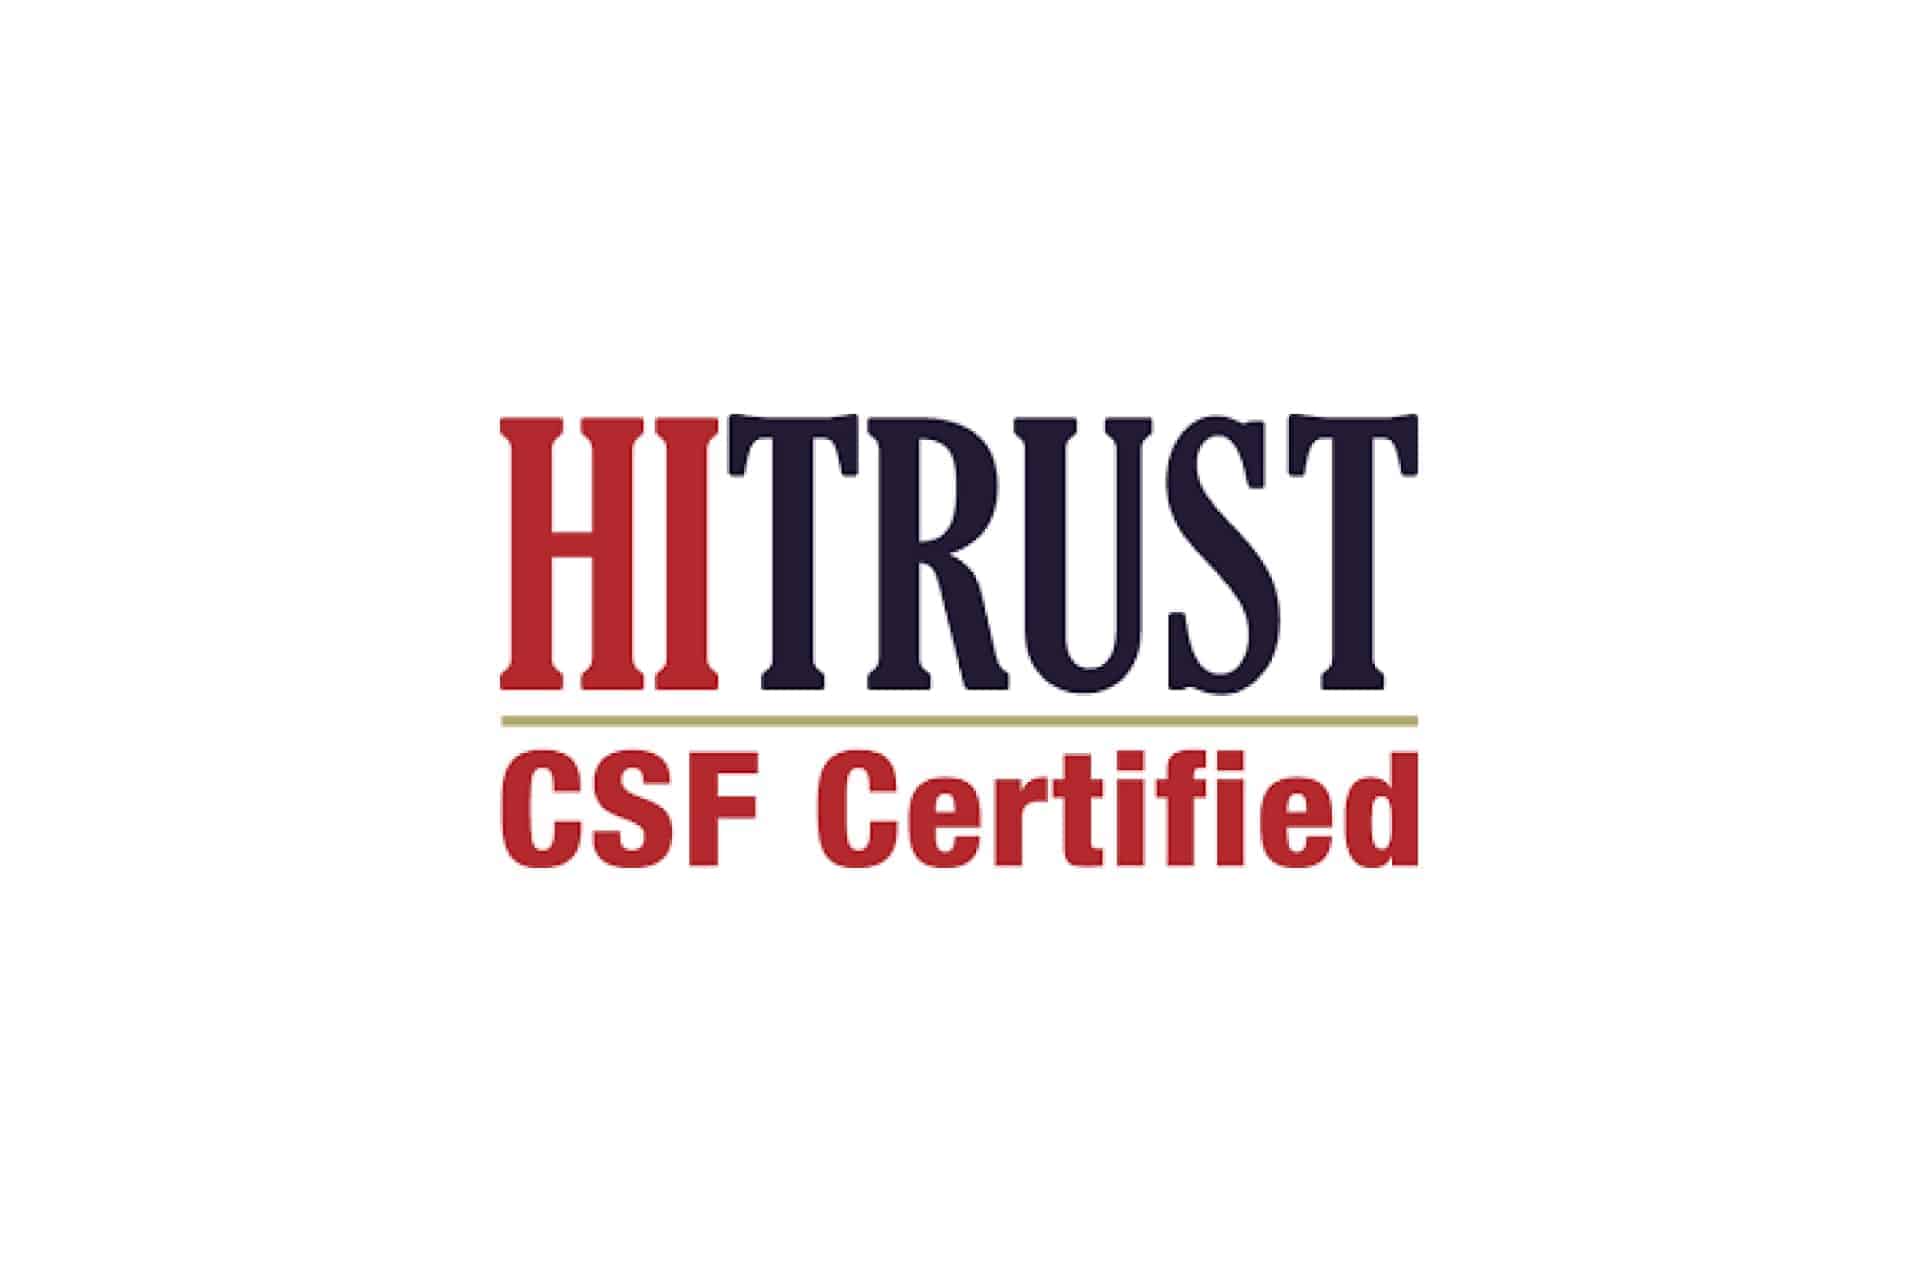 HITRUST: New Assessment Options on the Way